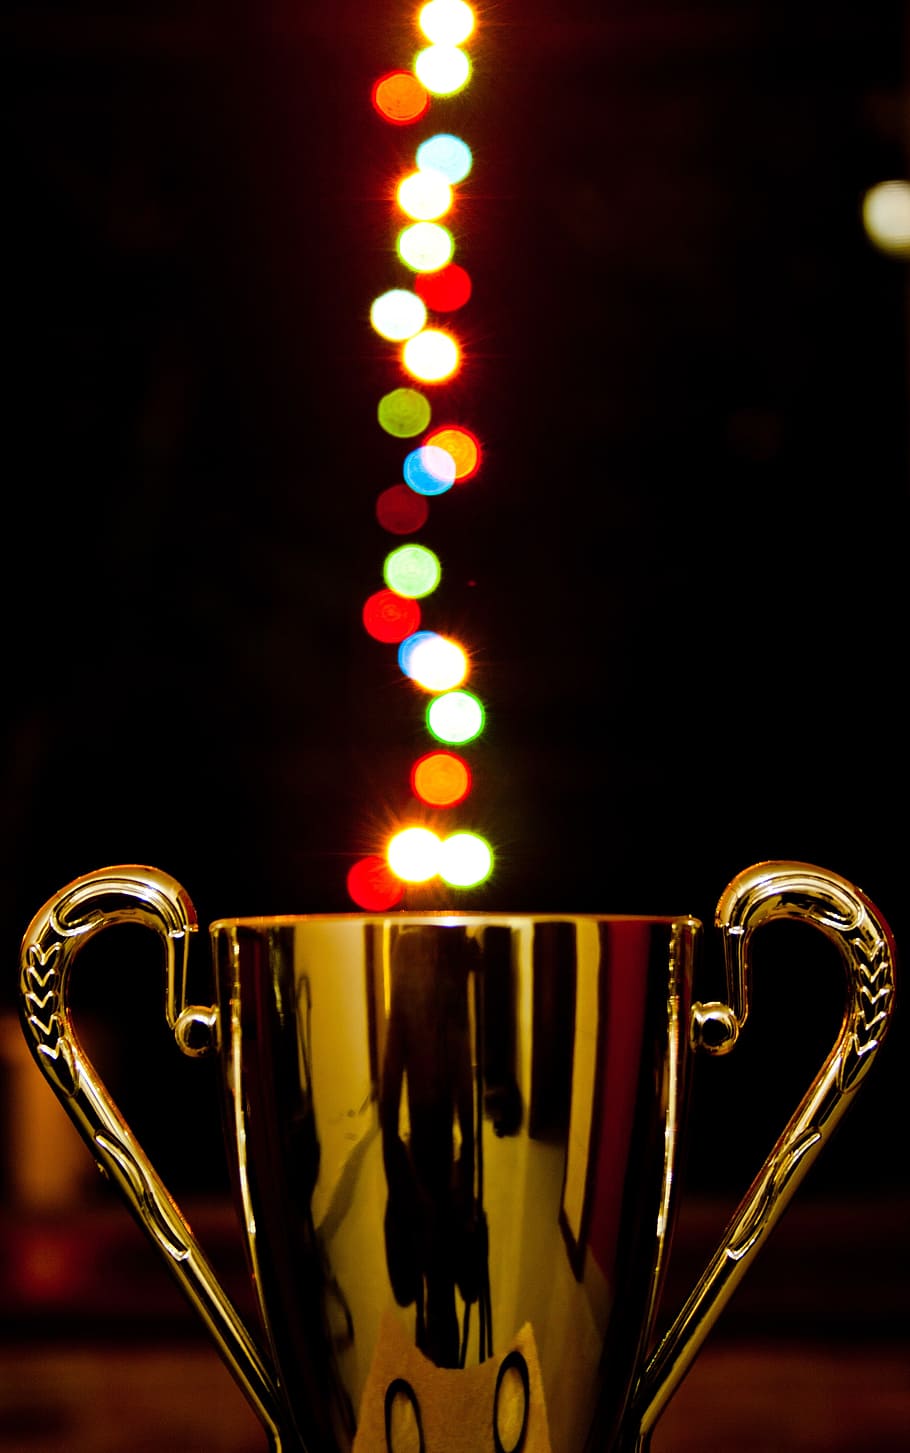 gold trophy figure with bokeh effect, award, cup, lights, prize